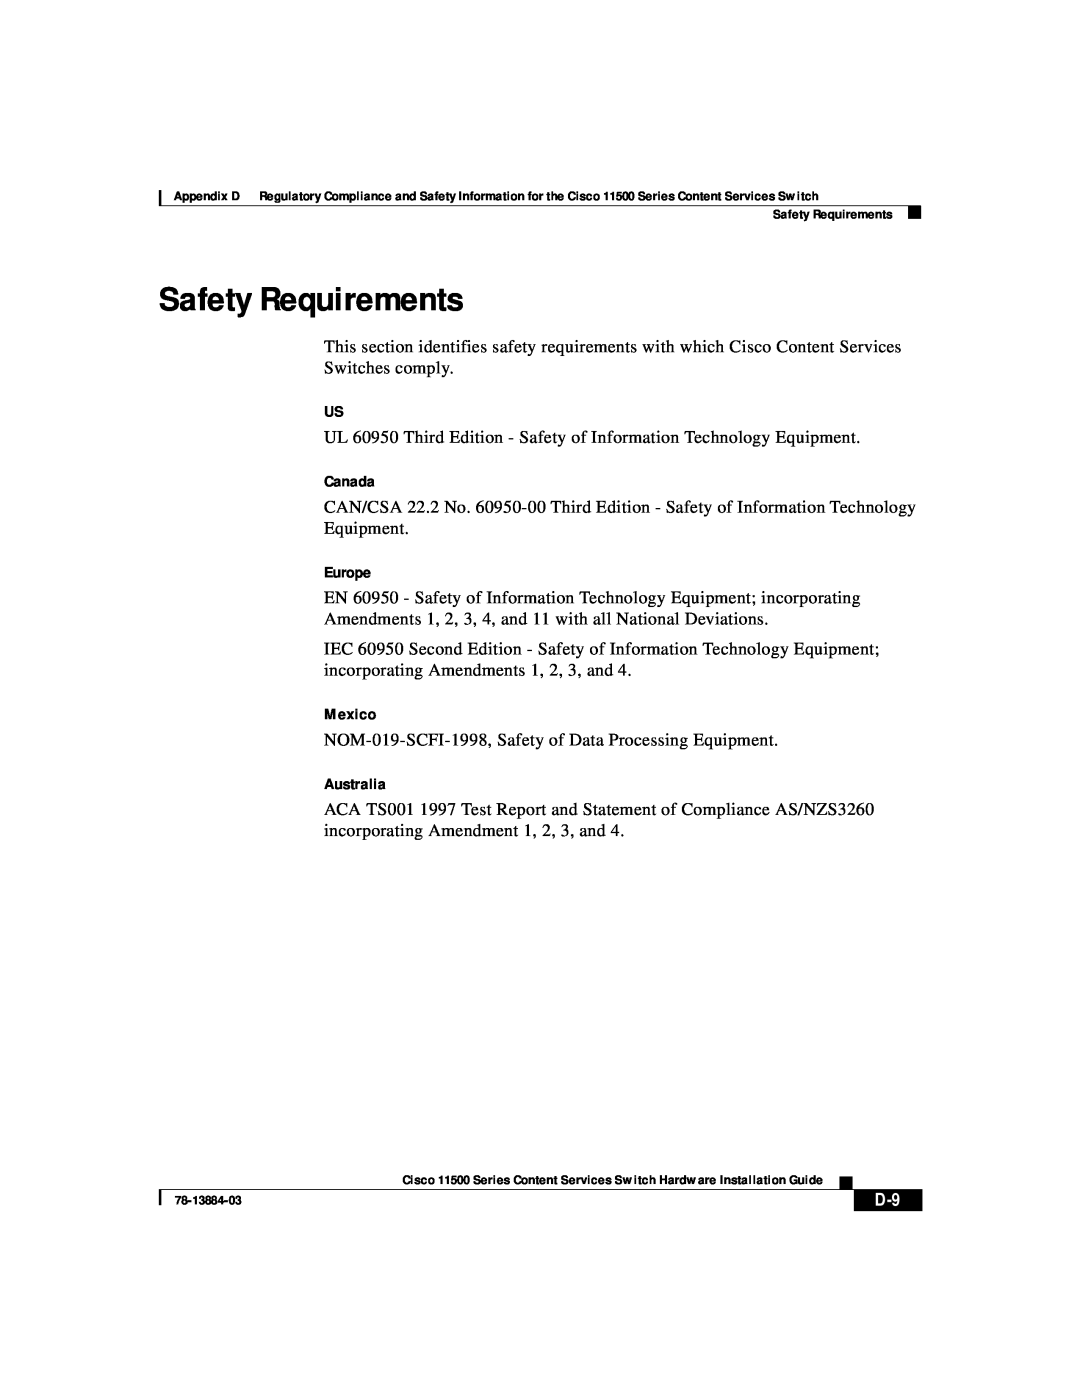 Cisco Systems 11500 Series manual Safety Requirements 